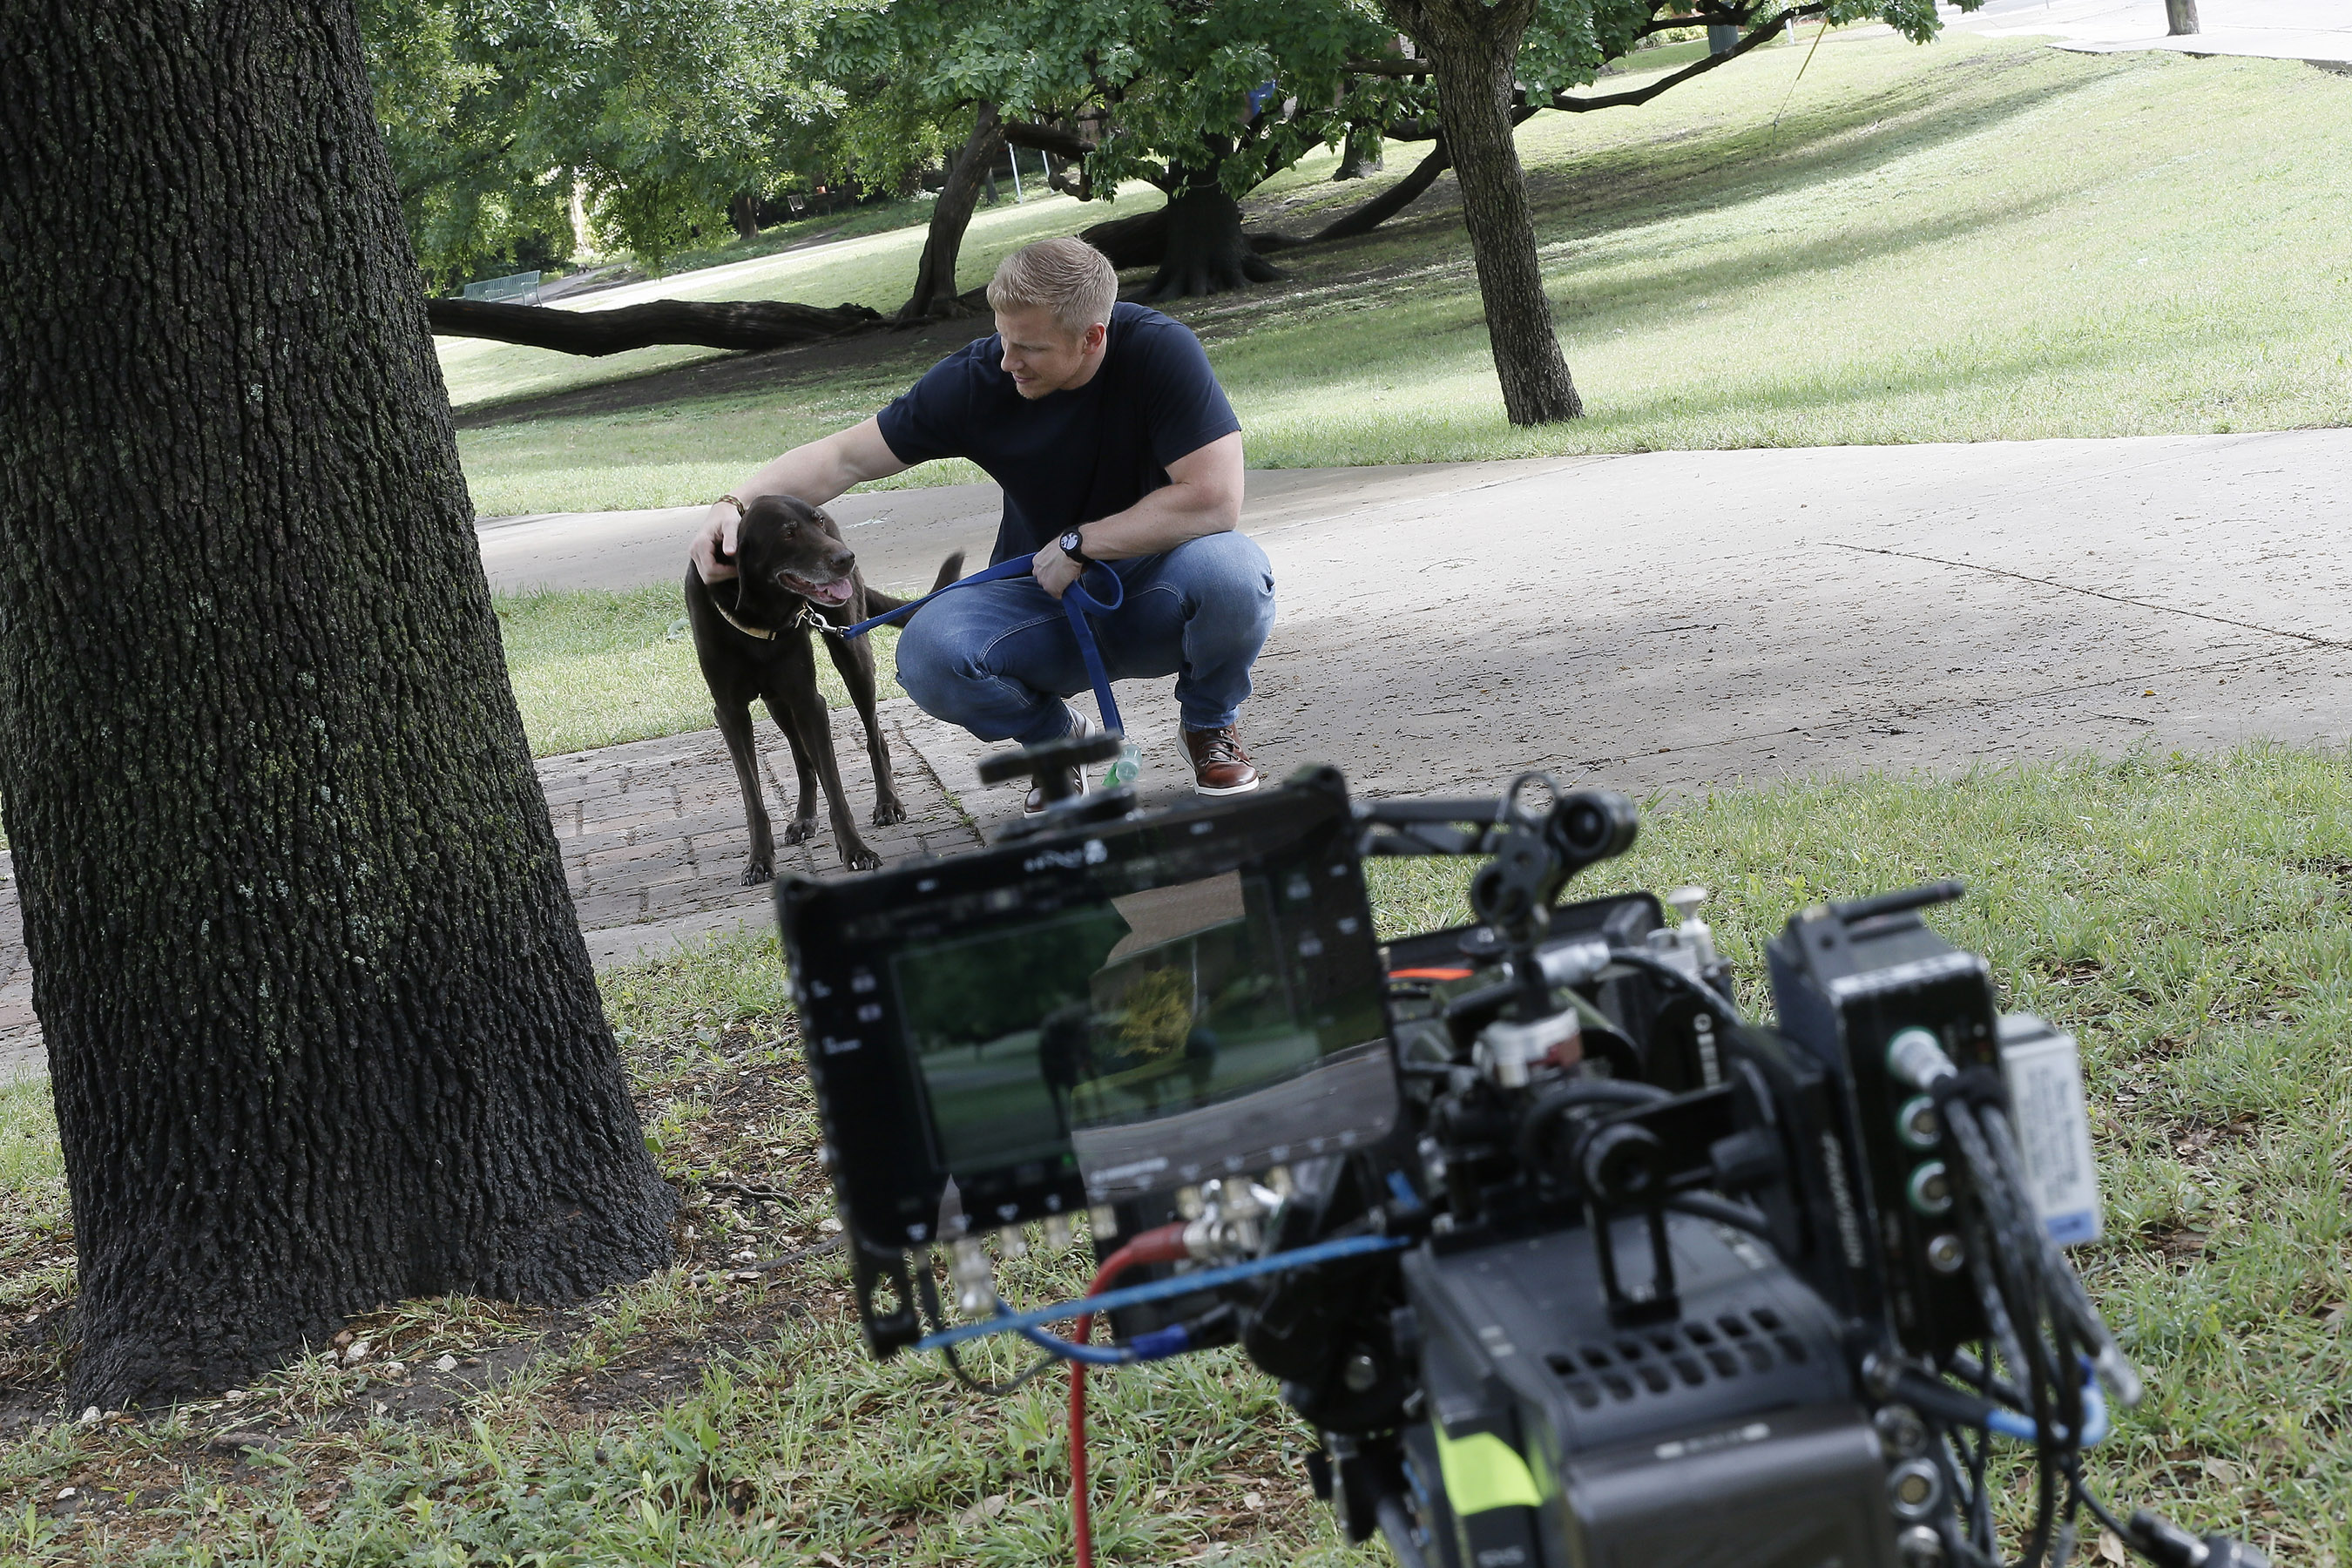 TV personality and Hurricane Harvey responder, Sean Lowe, takes a break from filming a PSA on pet disaster preparedness with the Banfield Foundation to give his beloved dog, Ellie, some love. The PSA debuted nationally on Wednesday, June 6, 2018, and educates pet owners on the simple yet potentially life-saving steps they can take for their pets before the next disaster strikes. (Photo credit: Brandon Wade/AP Images for the Banfield Foundation)